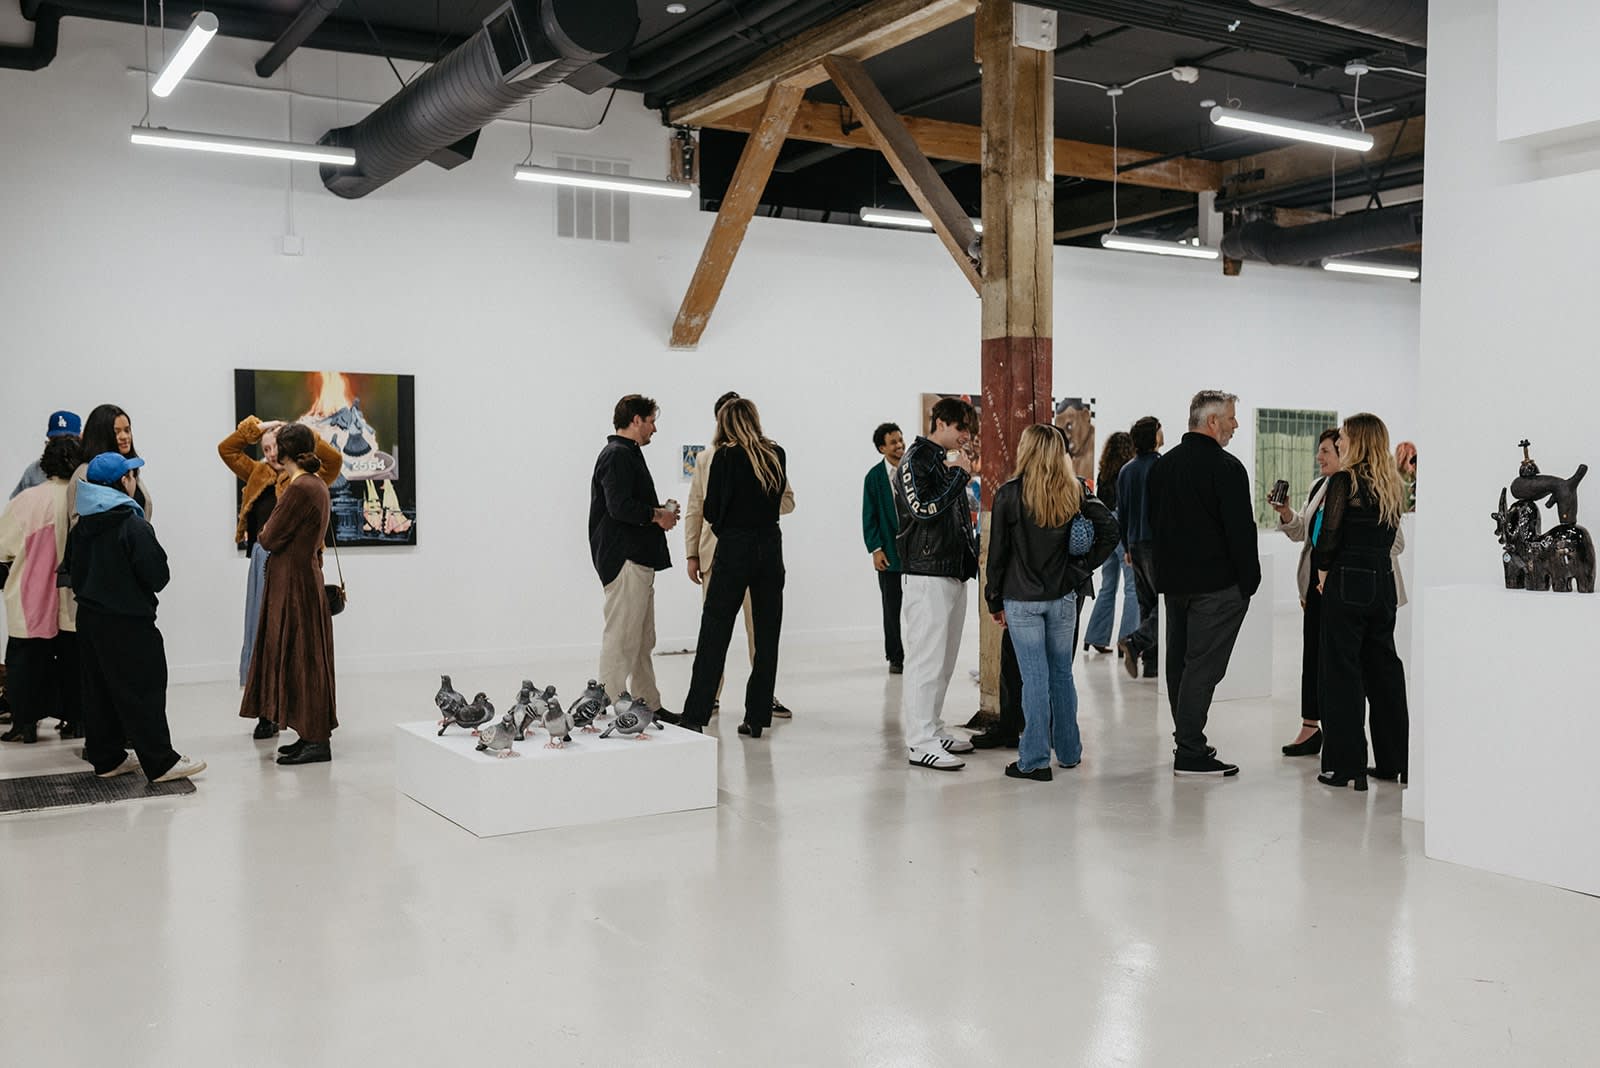 photograph of people inside the gallery surrounded by paintings and artwork